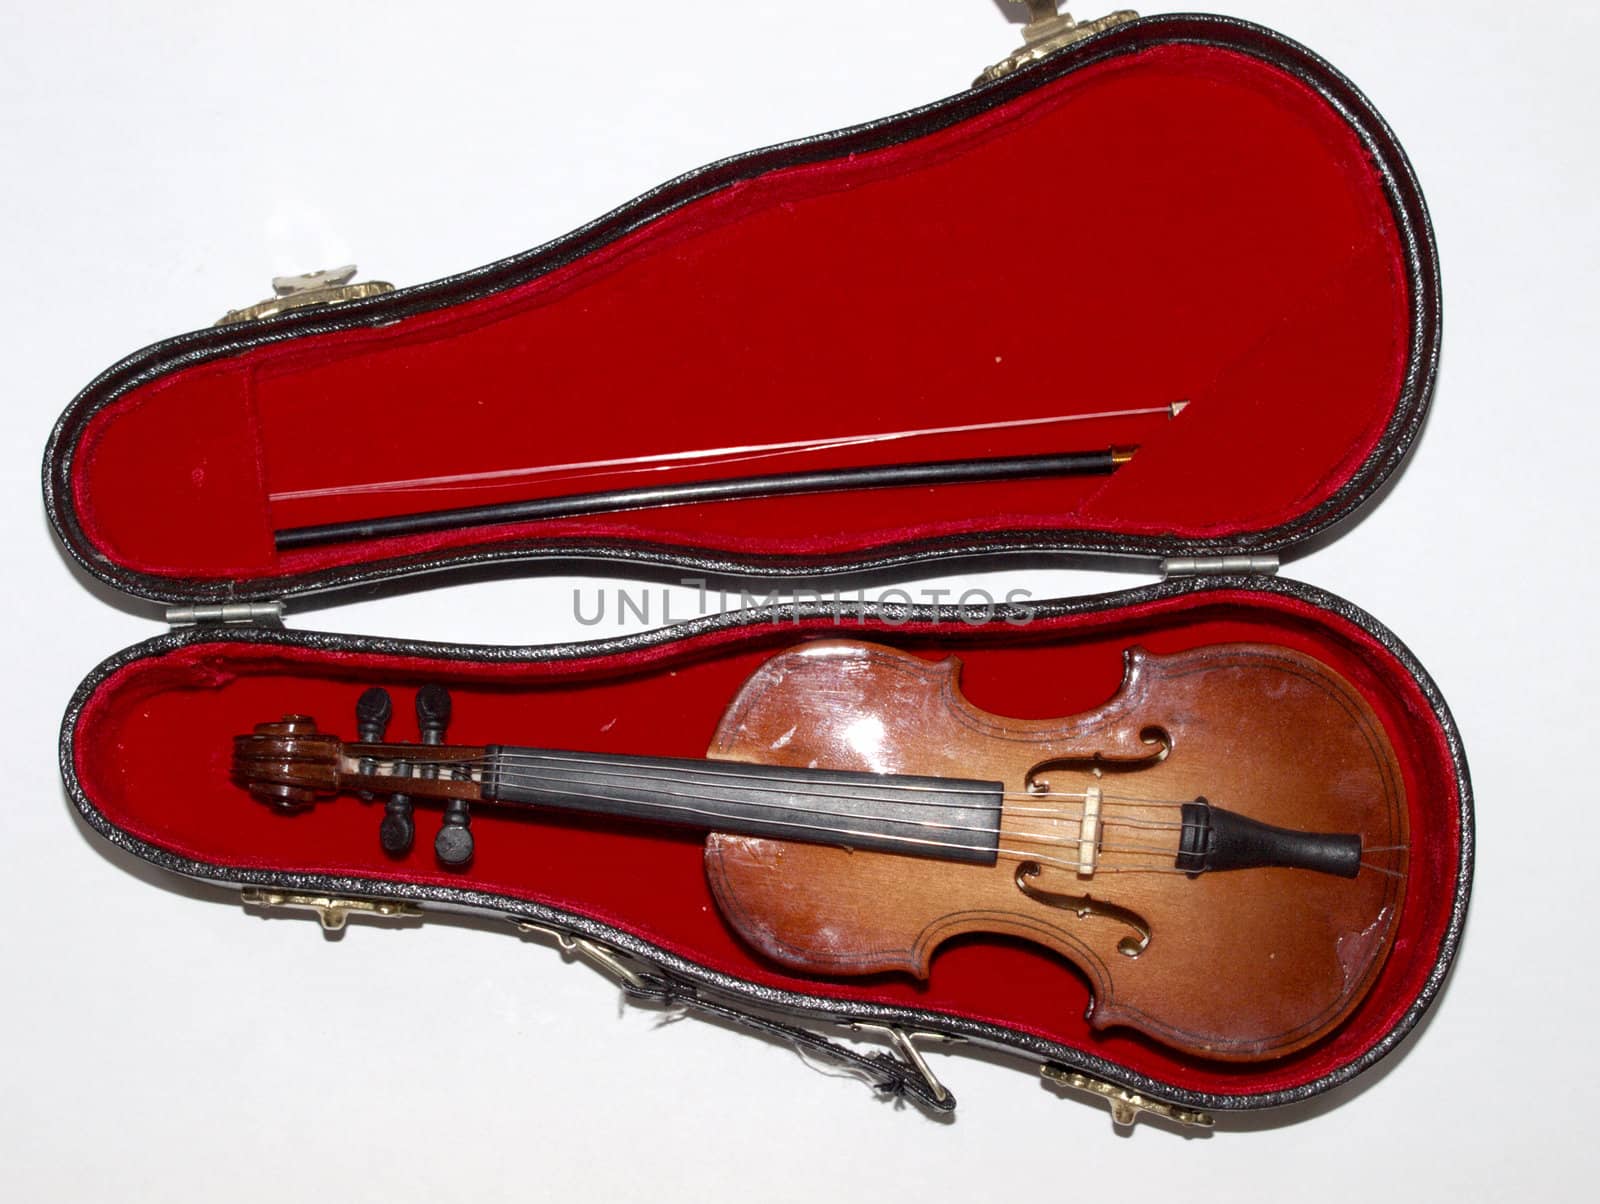 Small model of fiddle by renales